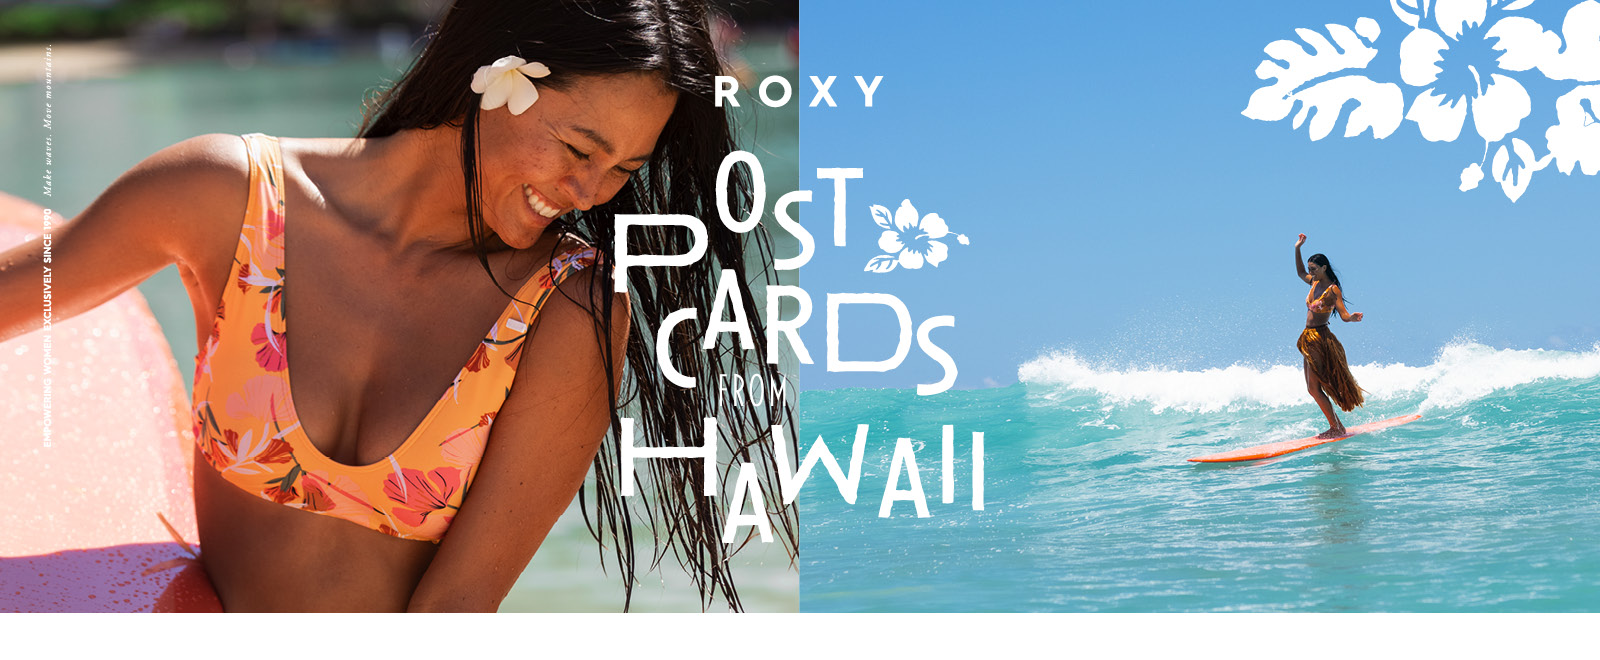 POSTCARDS FROM HAWAII